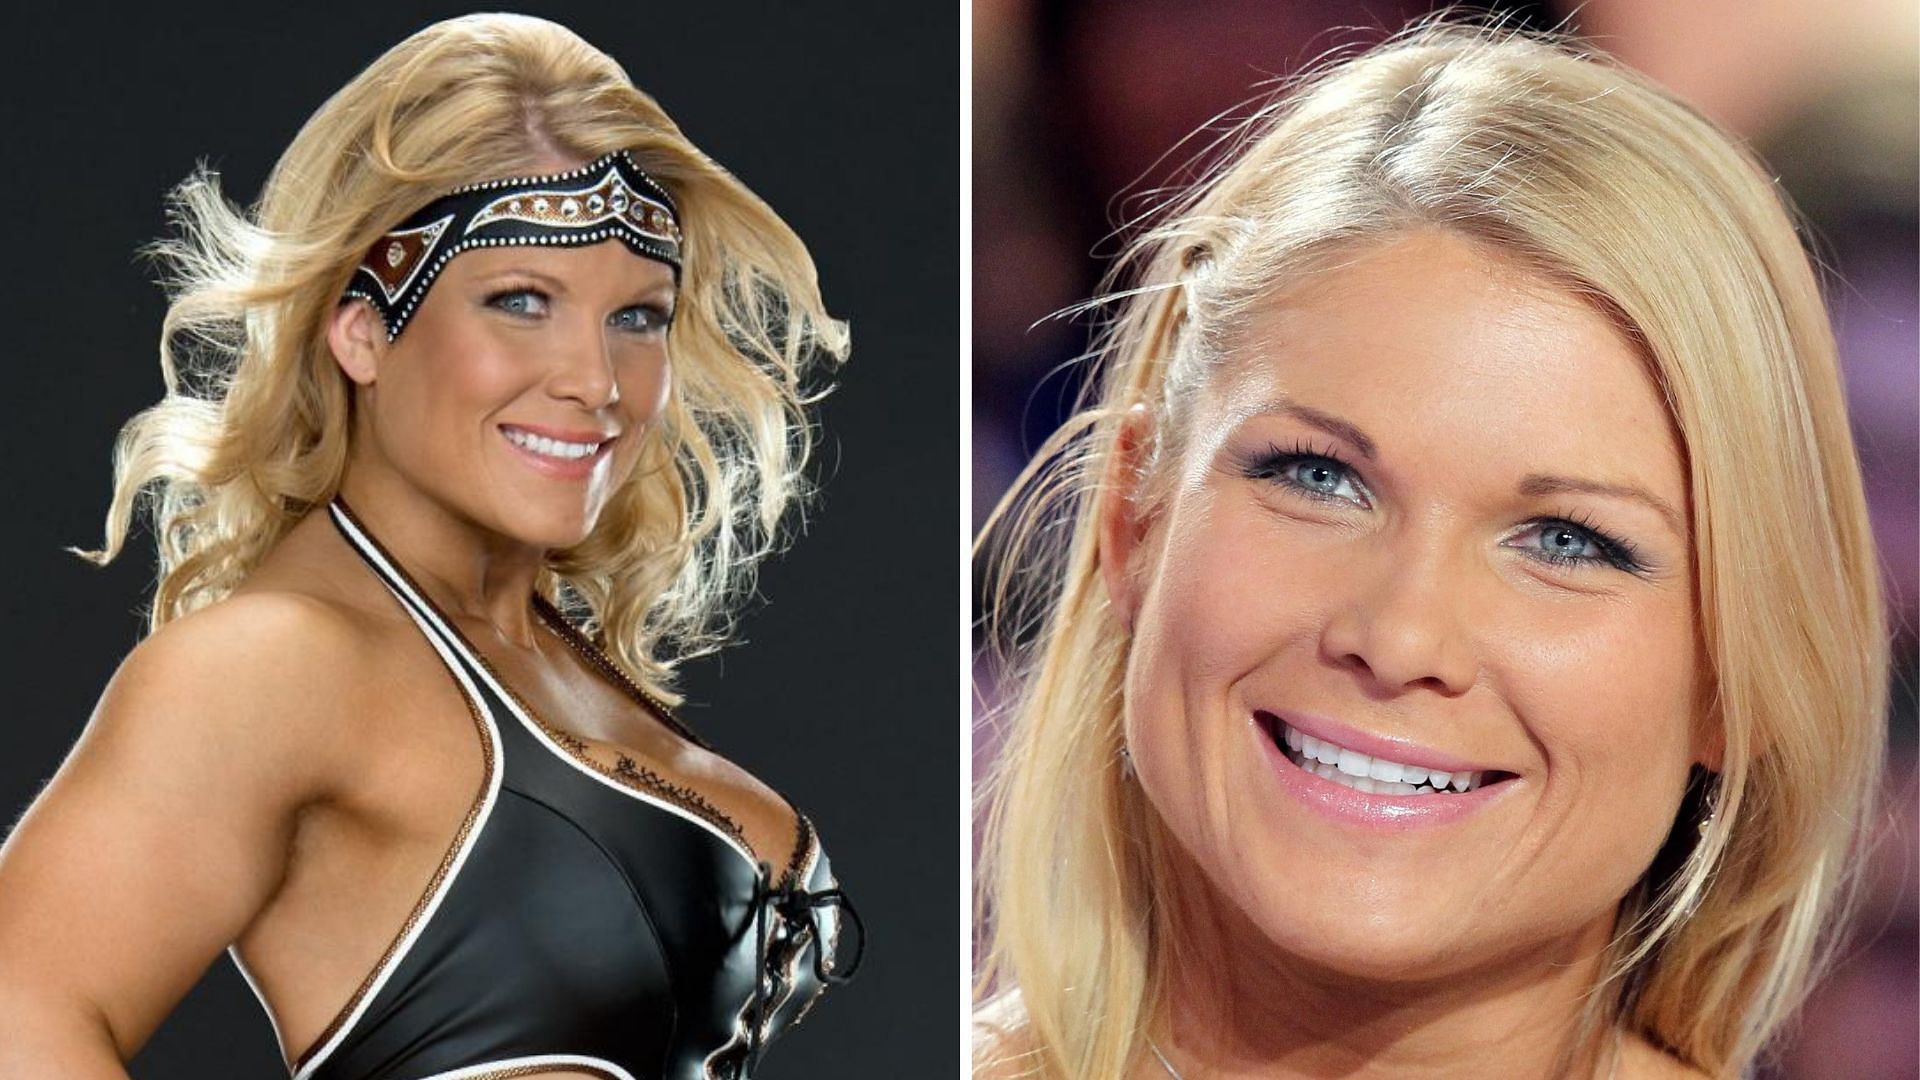 Beth Phoenix was inducted into the WWE Hall of Fame in 2017.